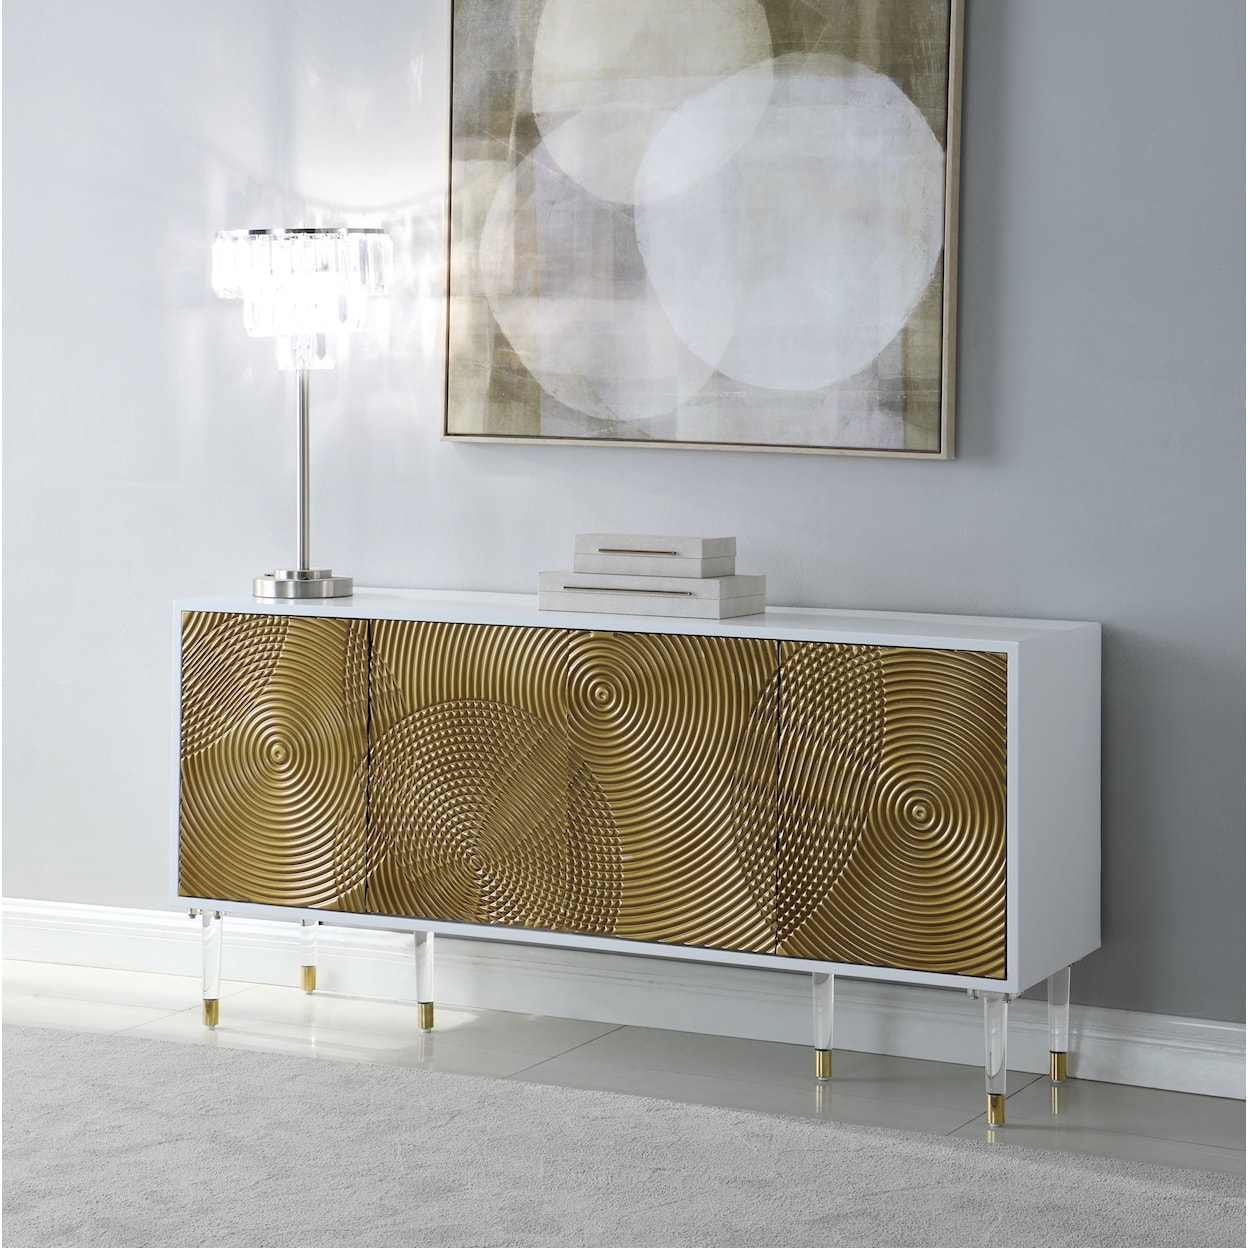 Meridian Furniture Bellissimo Sideboard with Gold-Finished Panels